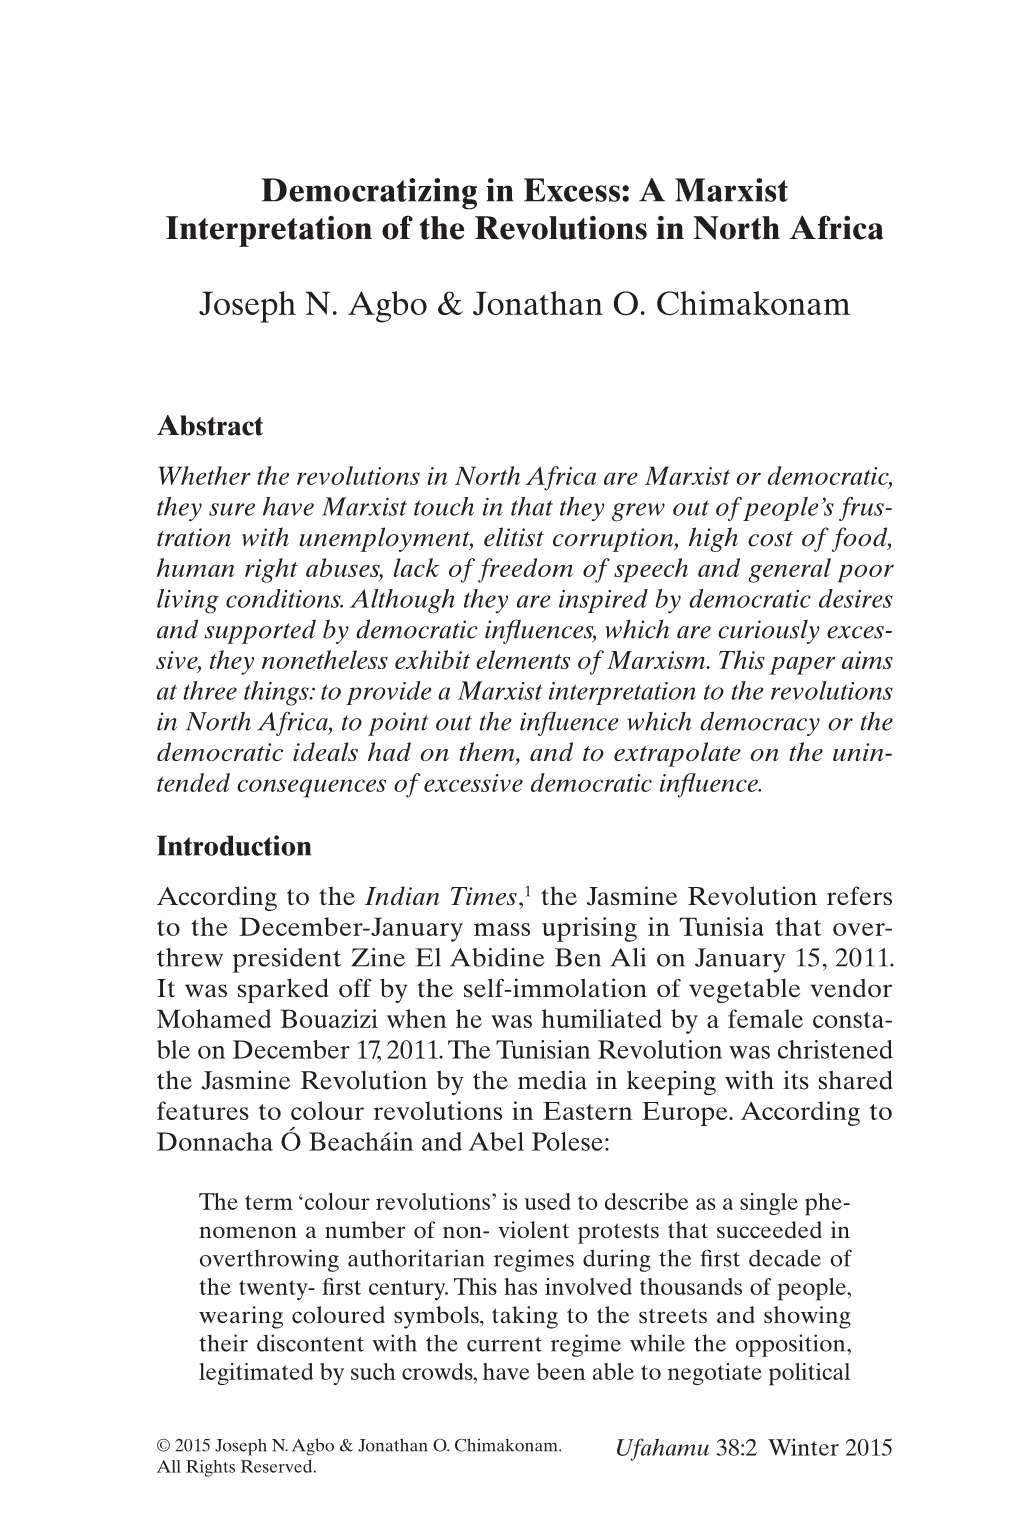 Democratizing in Excess: a Marxist Interpretation of the Revolutions in North Africa